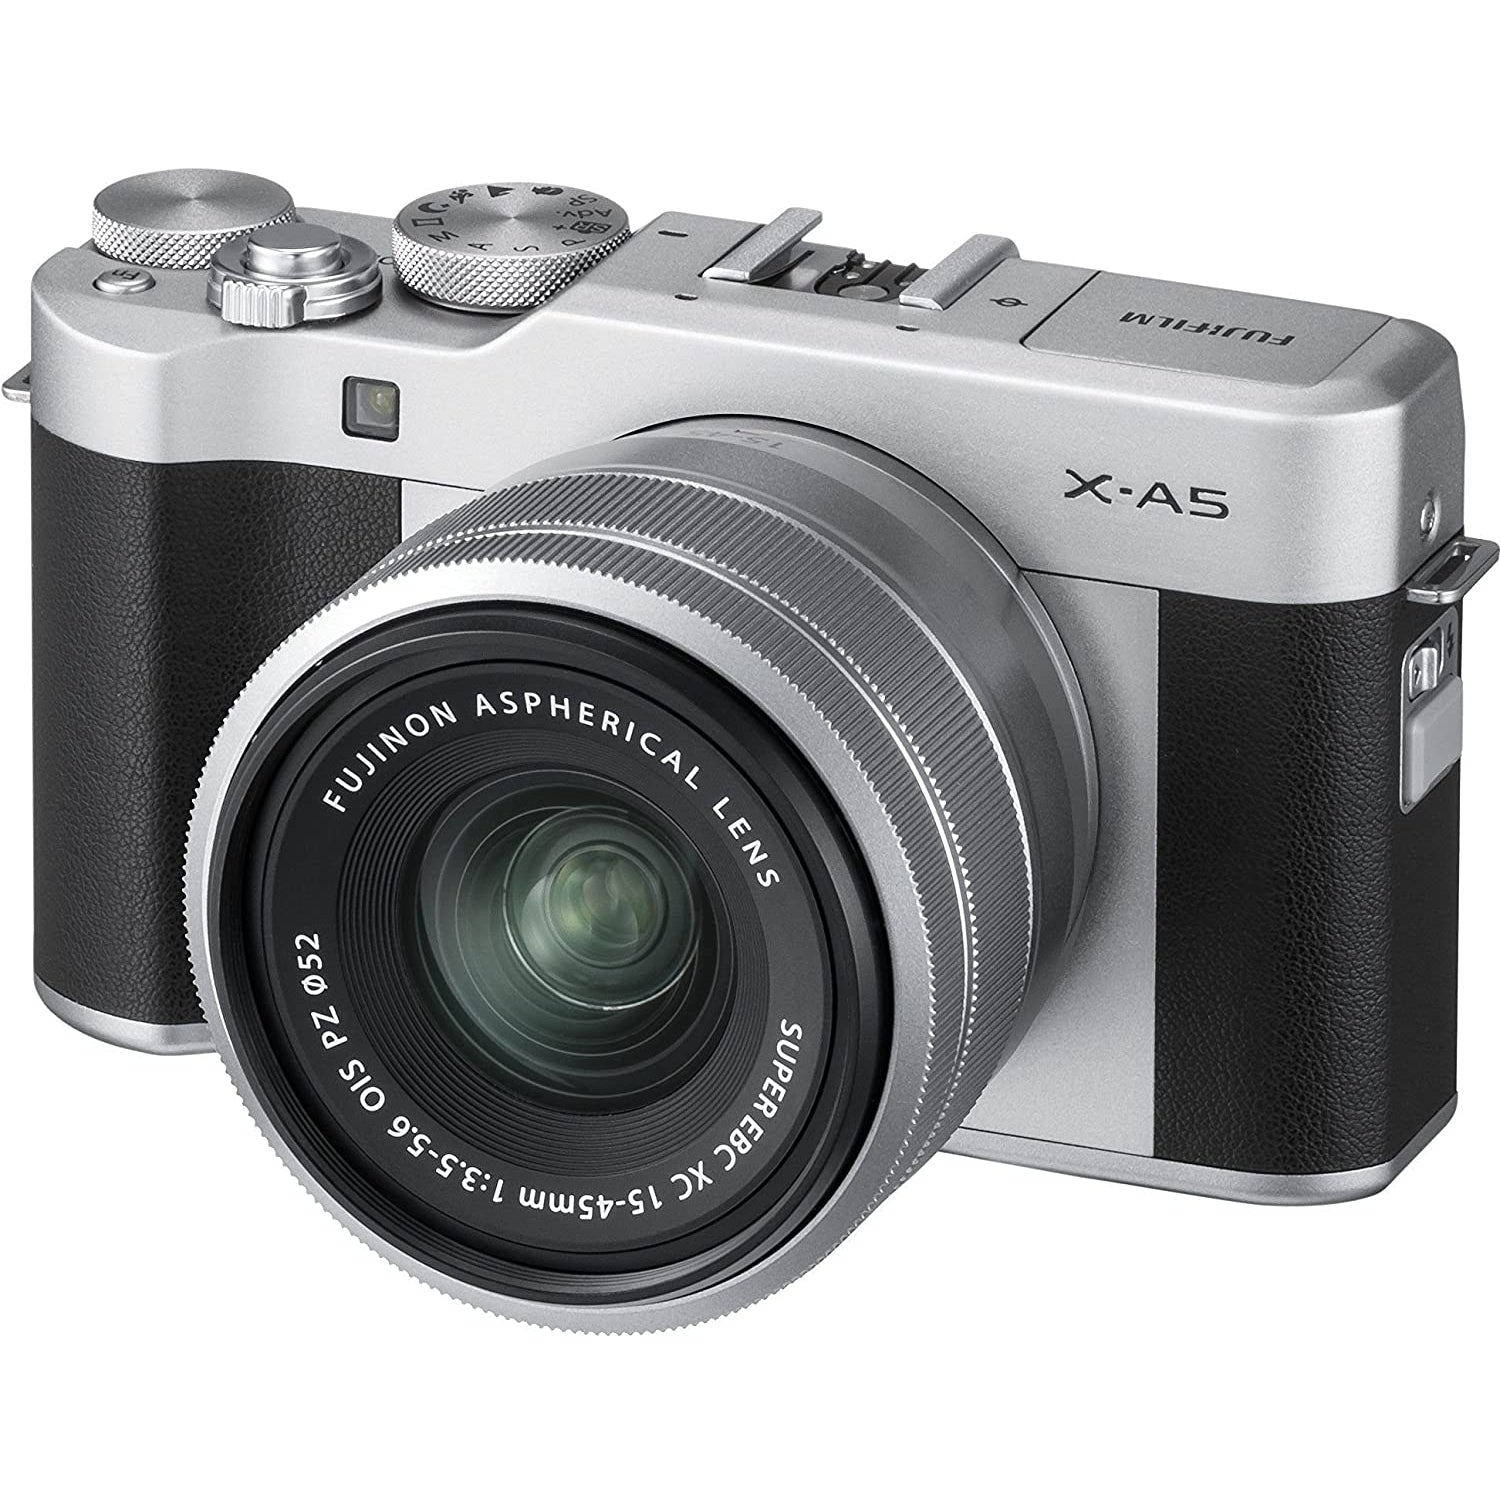 Fujifilm X-A5 Compact System Camera with XC 15-45mm OIS Lens, 24.2MP, Wi-Fi, Black & Silver